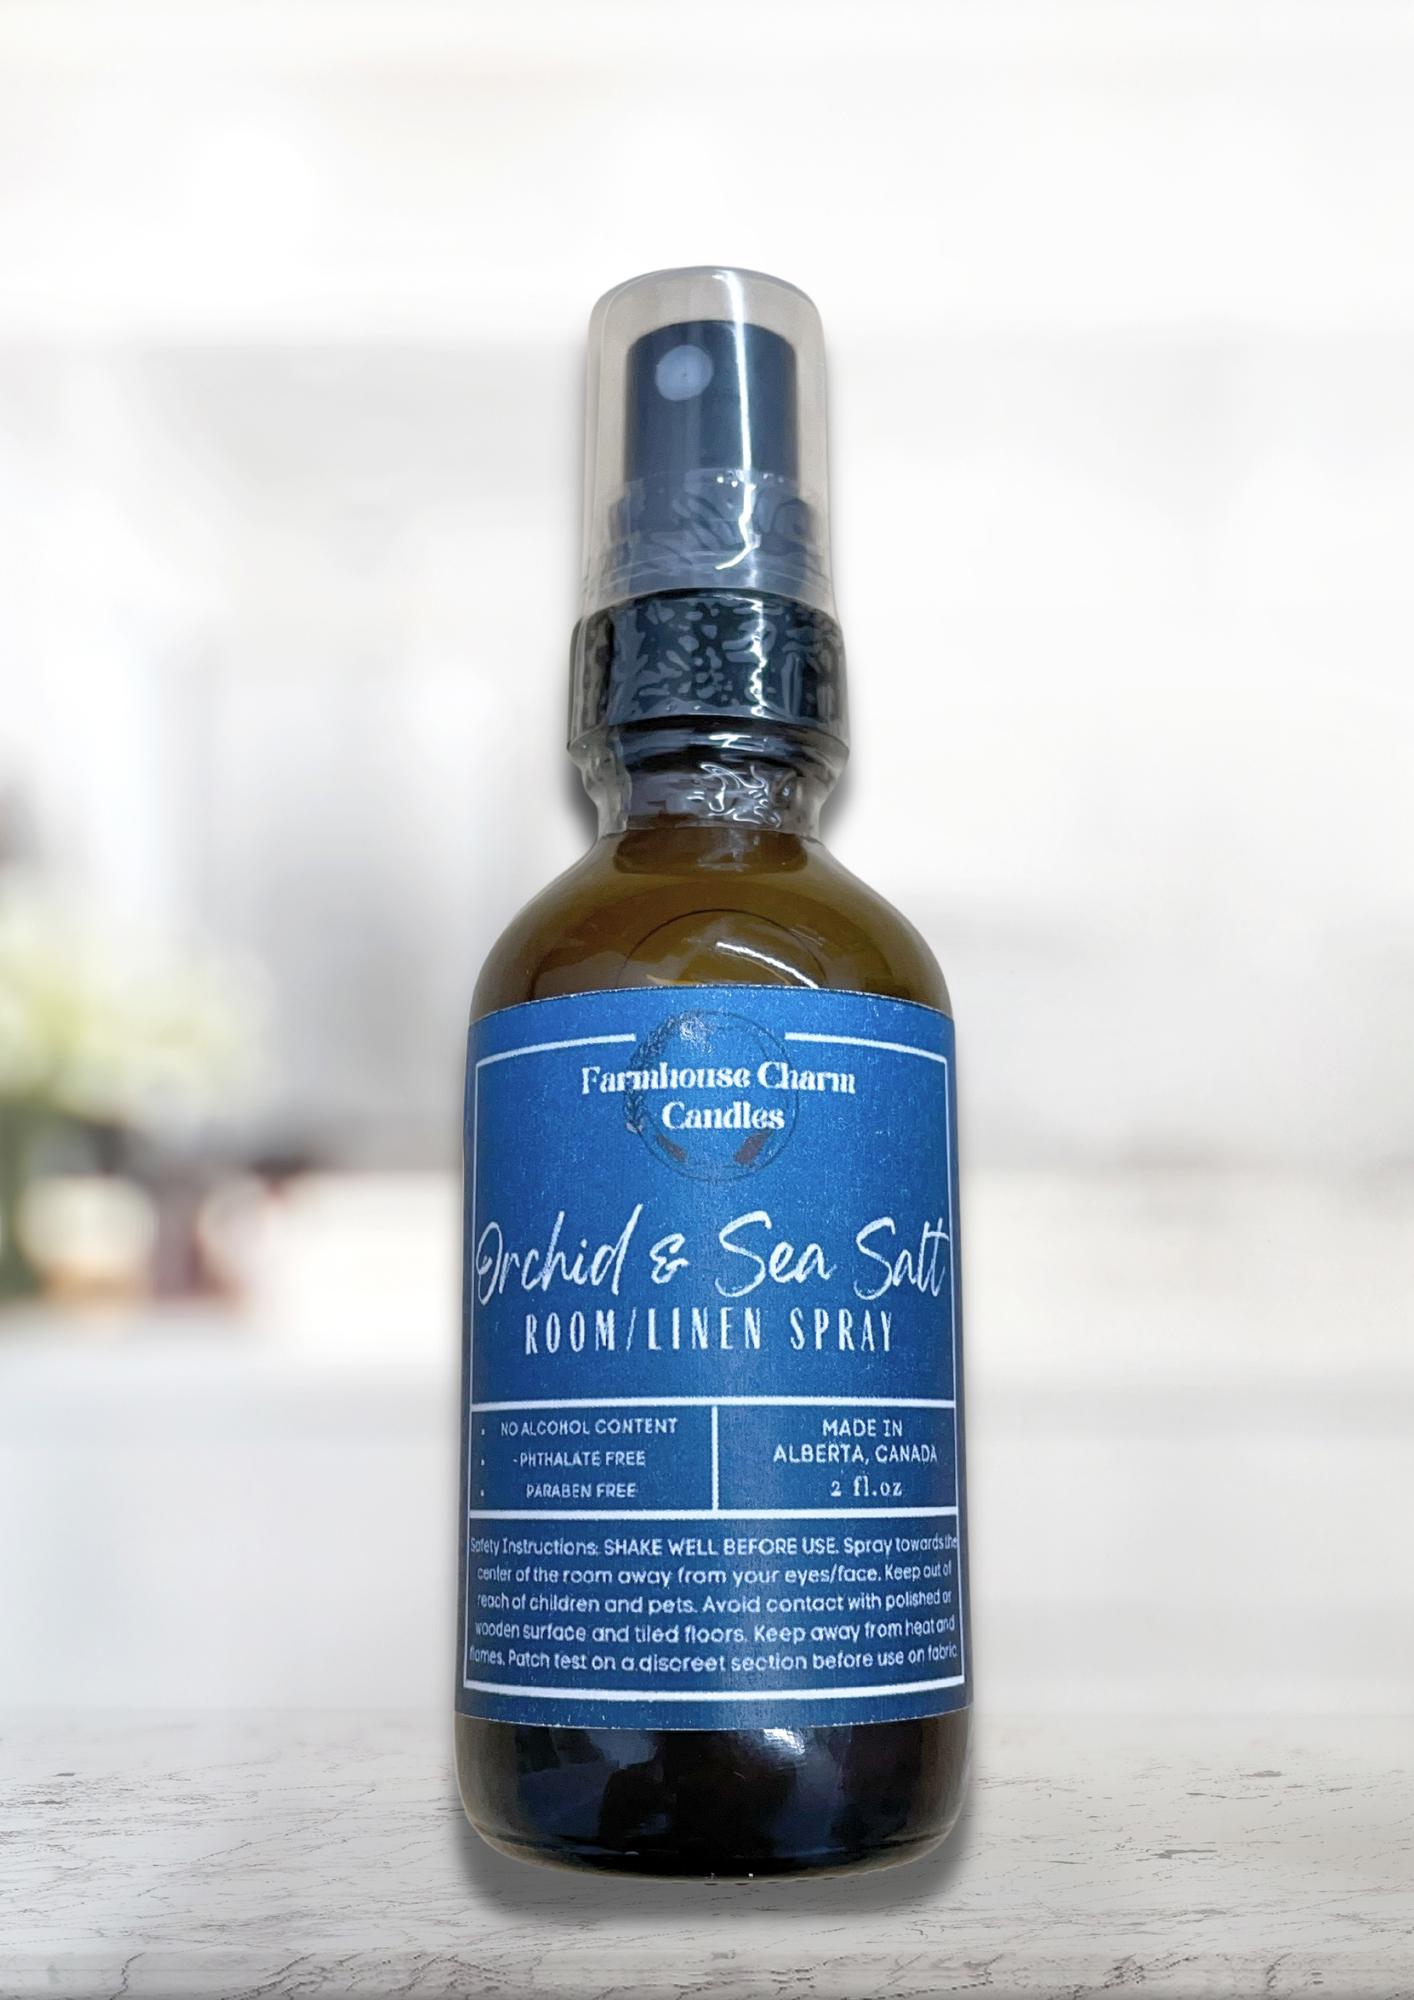 Orchid & Sea Salt Room and Linen Spray- Farmhouse Charm is a blend of soft florals of orchid with a touch of jasmine and lily. It has a crisp aquatic highlights of sea salt mist that elevates the smooth and elegant aroma. It is truly an invigorating scent!